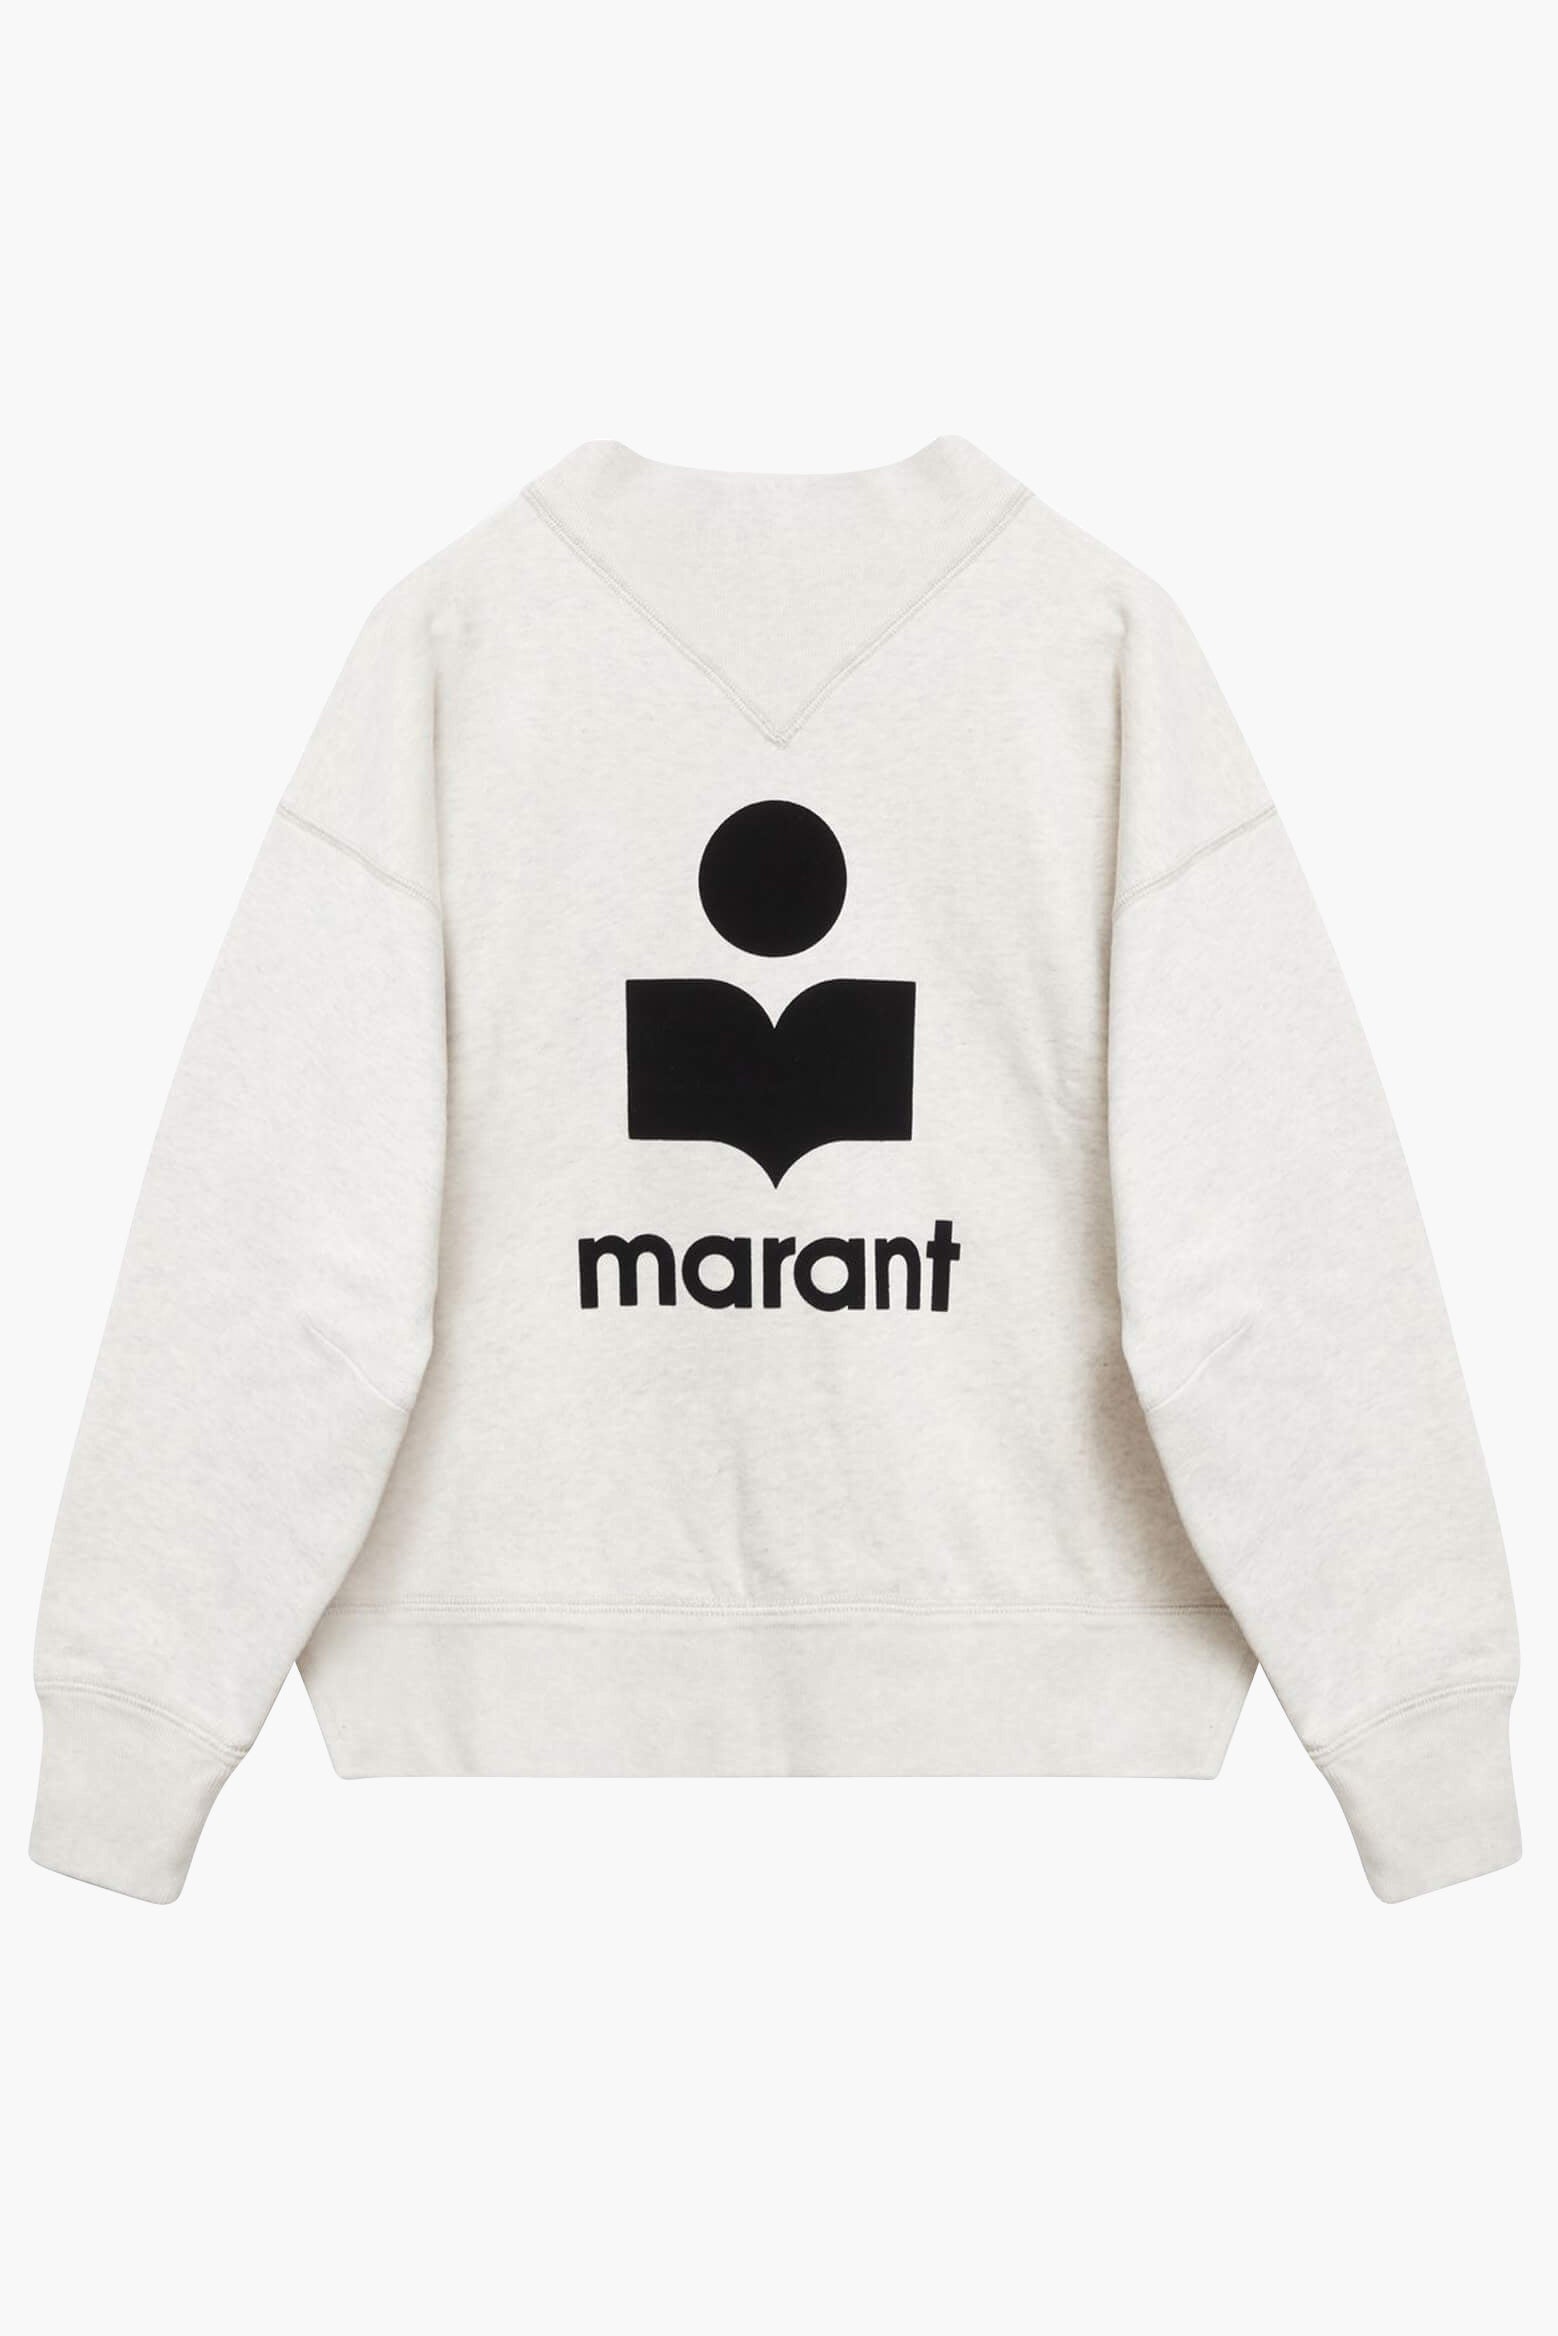 Isabel Marant Moby Sweatshirt in Ecru from The New Trend